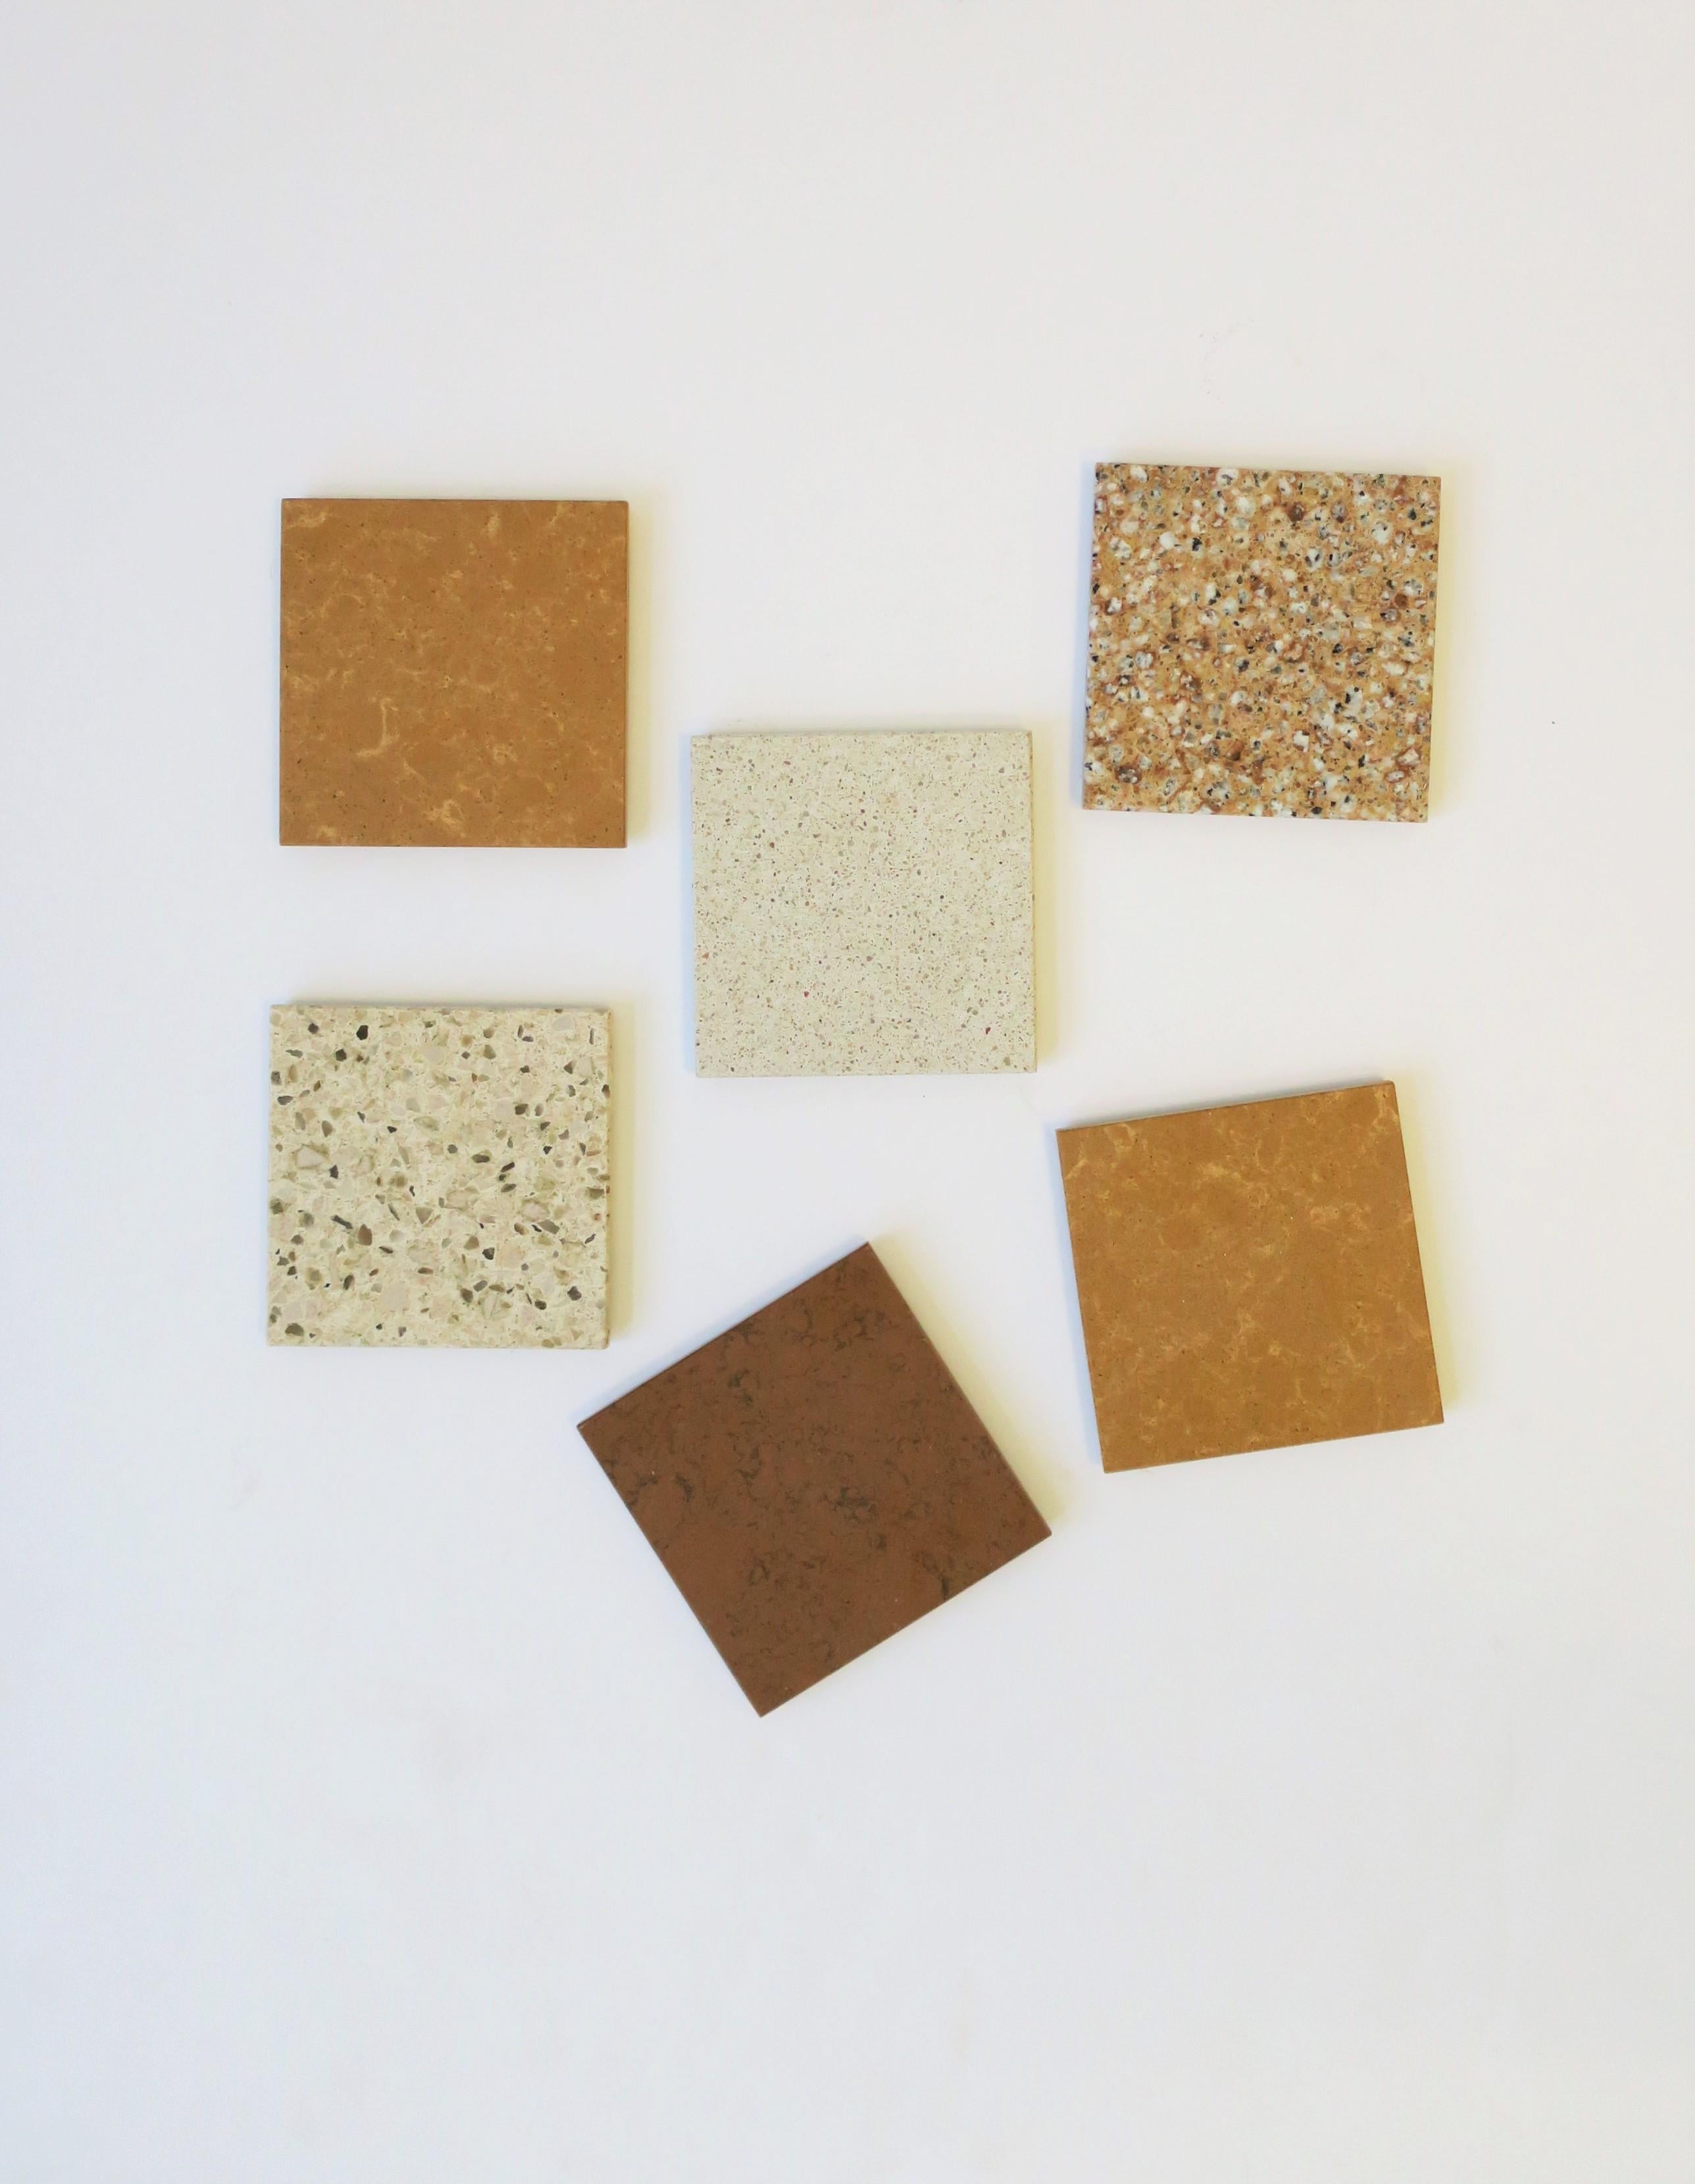 A beautiful set of six (6) modern or Minimalist style stone coasters for drinks, cocktails, champagne, etc. A great addition to any bar or bar cart; a necessity for protecting furniture surface/top. In browns, tan, and neutral hues.

 